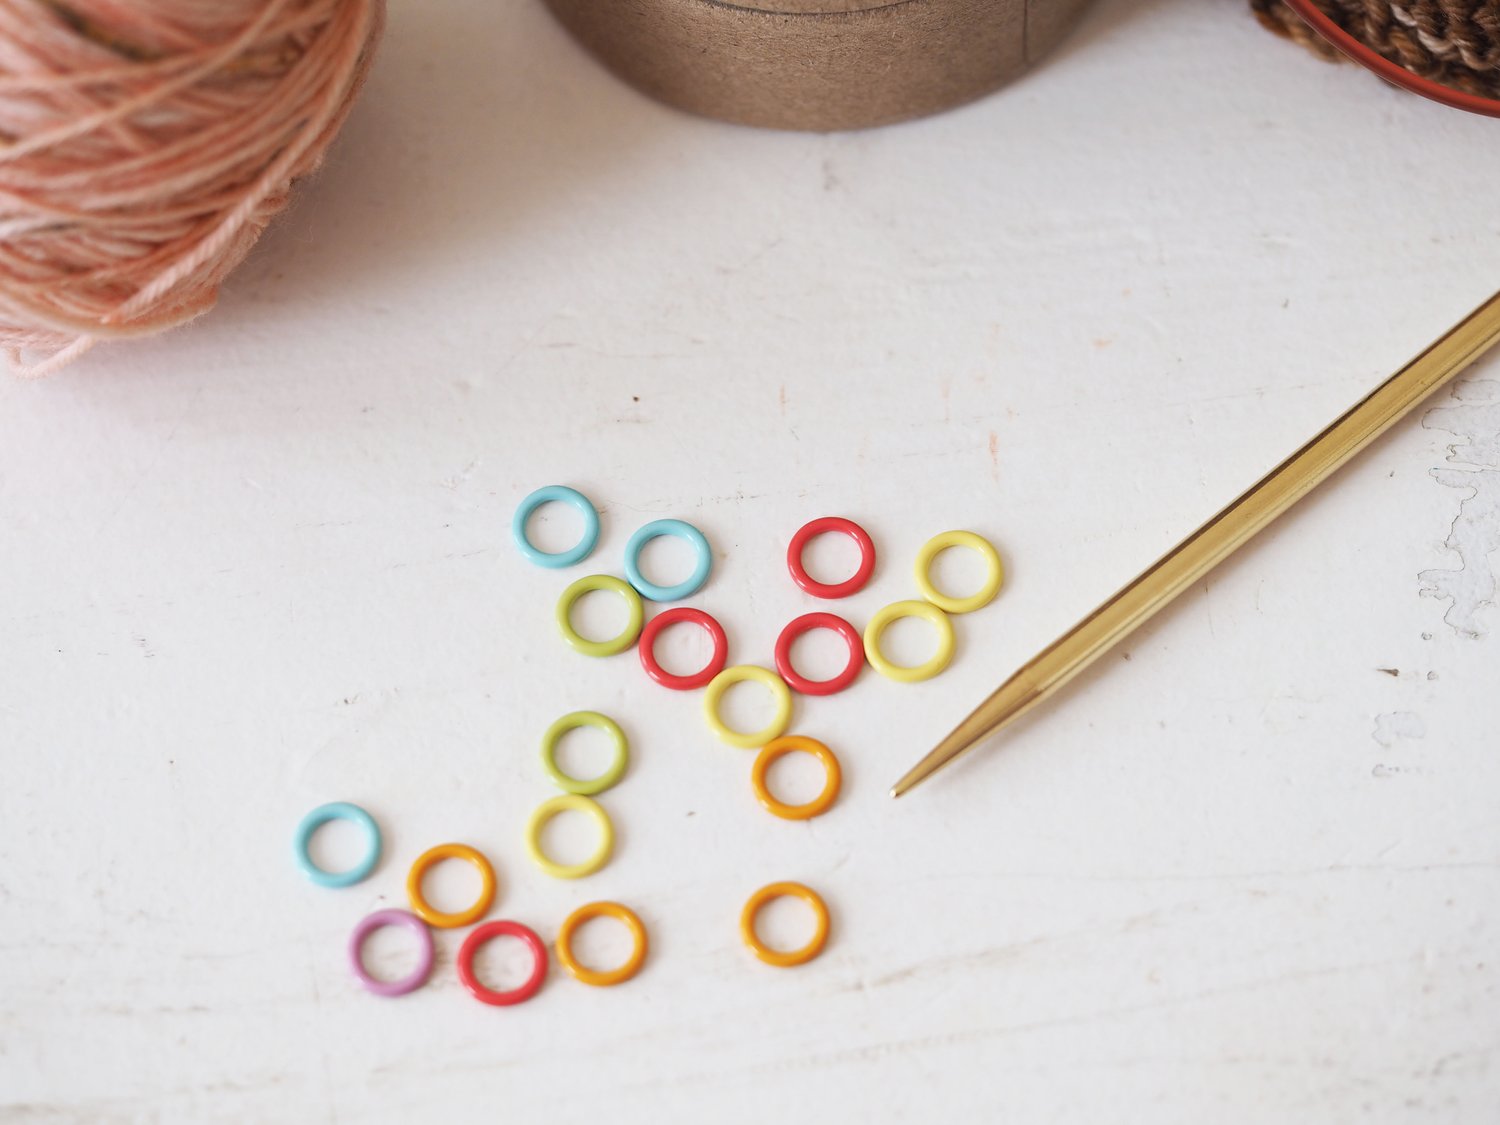 Cocoknits Split Ring Markers - The Yarn Studio